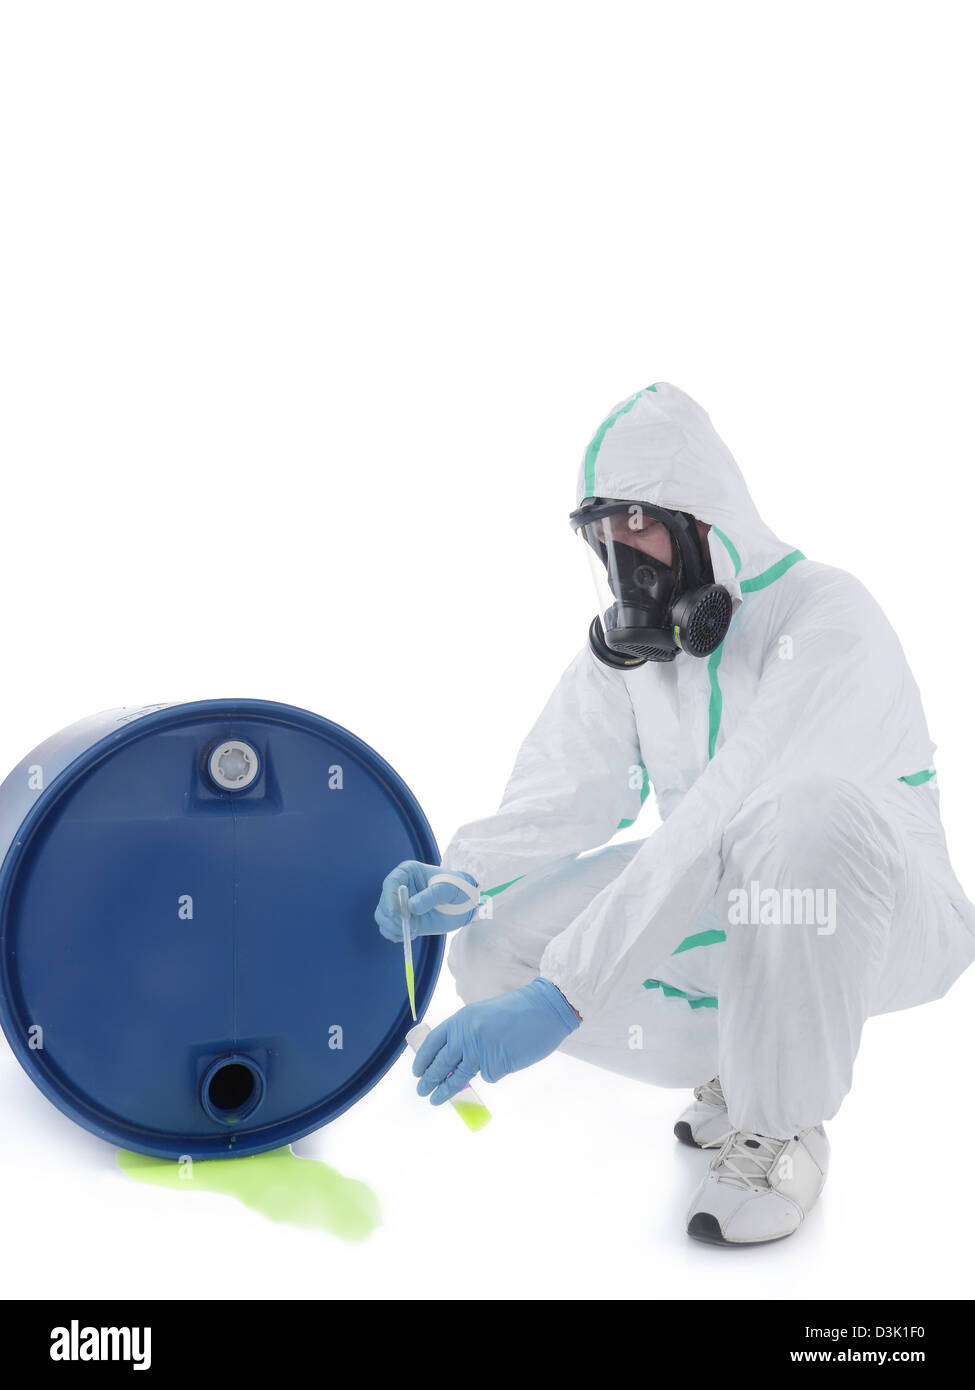 Man wearing protective suit and respirator sampling dangerous chemical liquid leaking from blue container Stock Photo